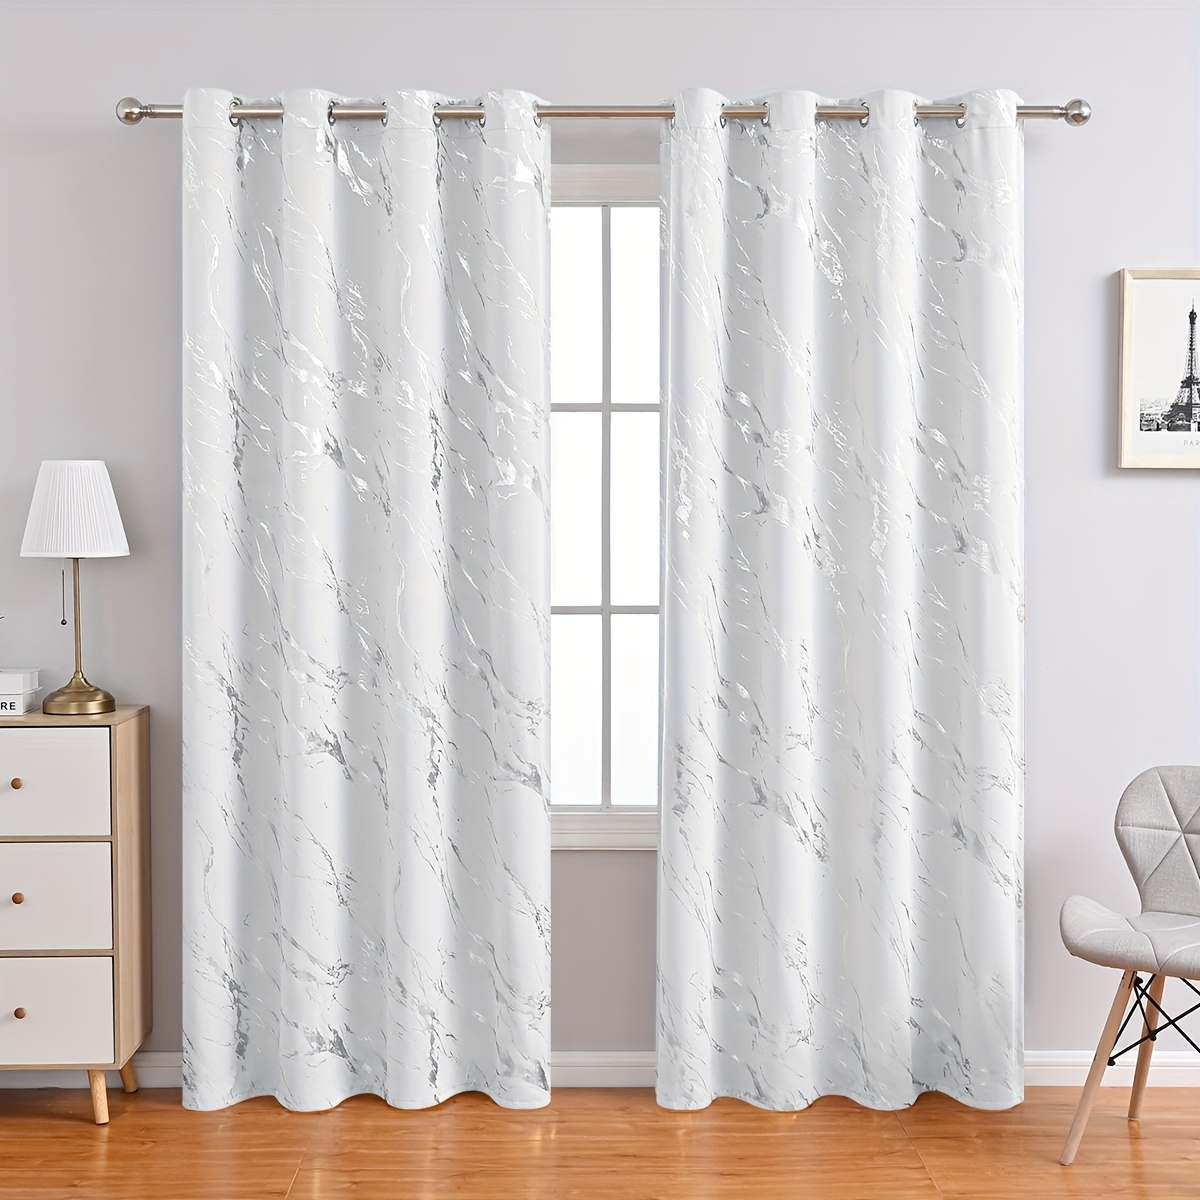 2pcs White Blackout Curtain With Marble Pattern, Modern Style Polyester Fiber, Suitable For Home Decoration, Living Room And Bedroom